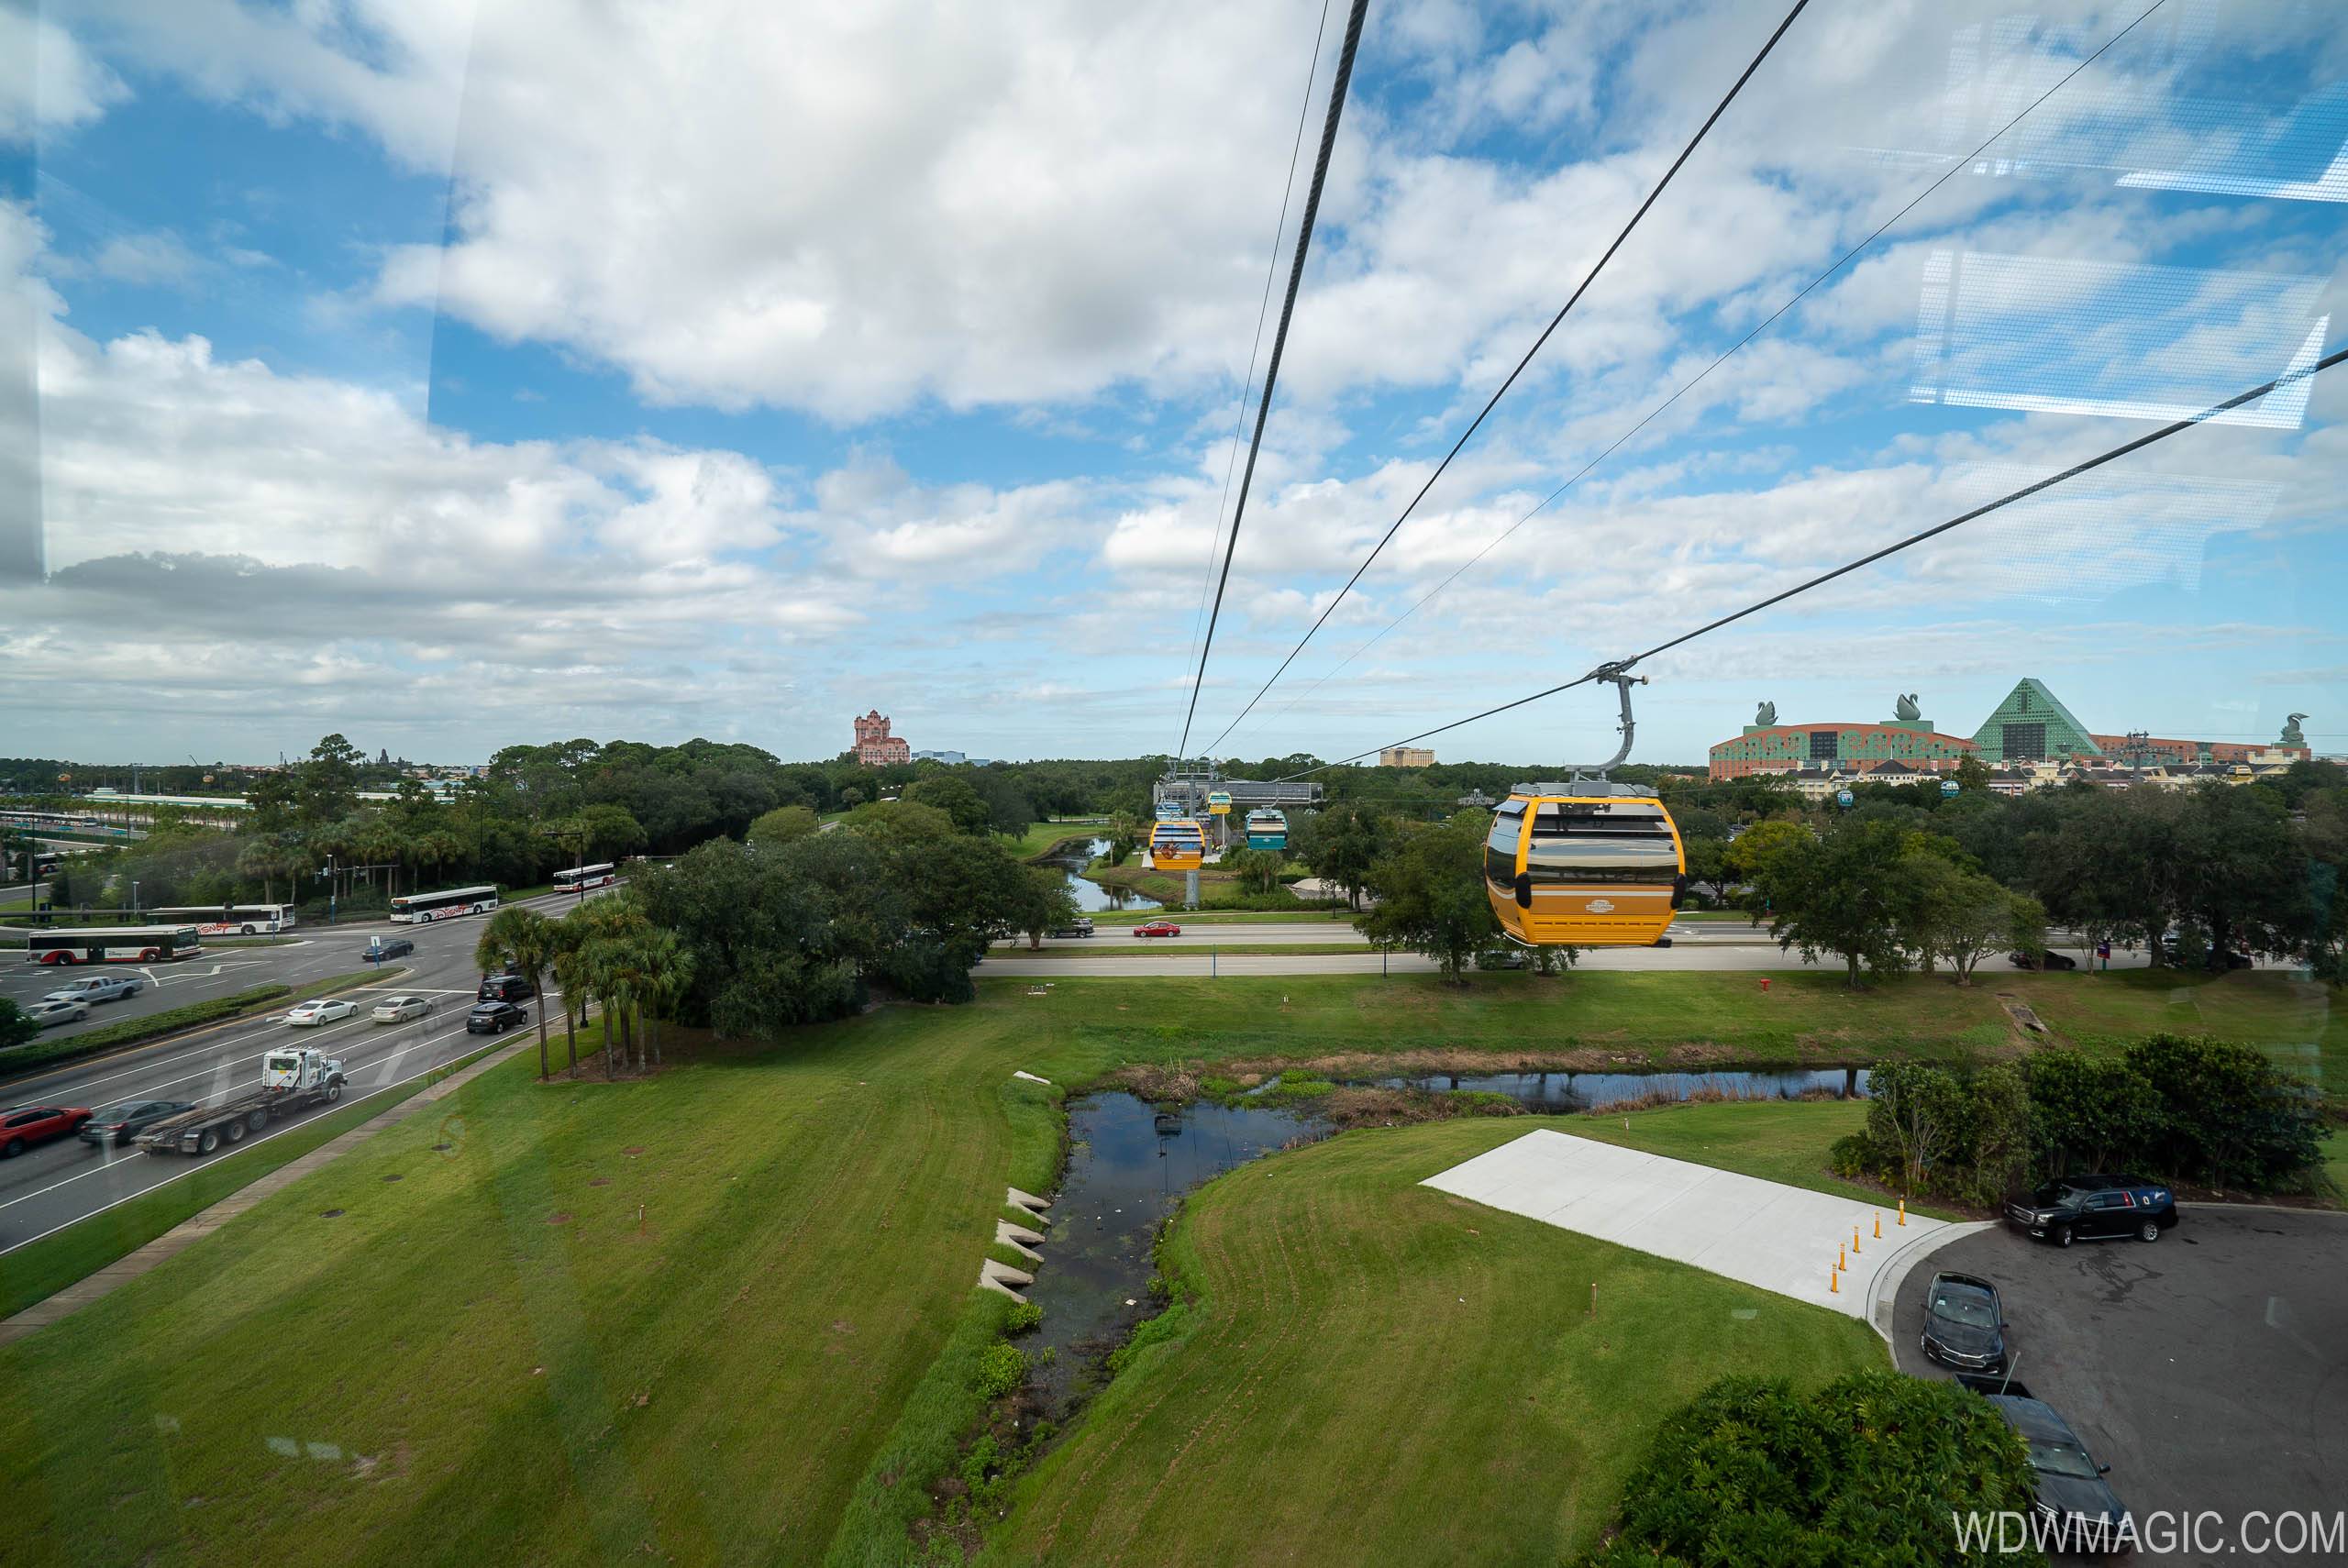 Onboard the Epcot Skyliner line